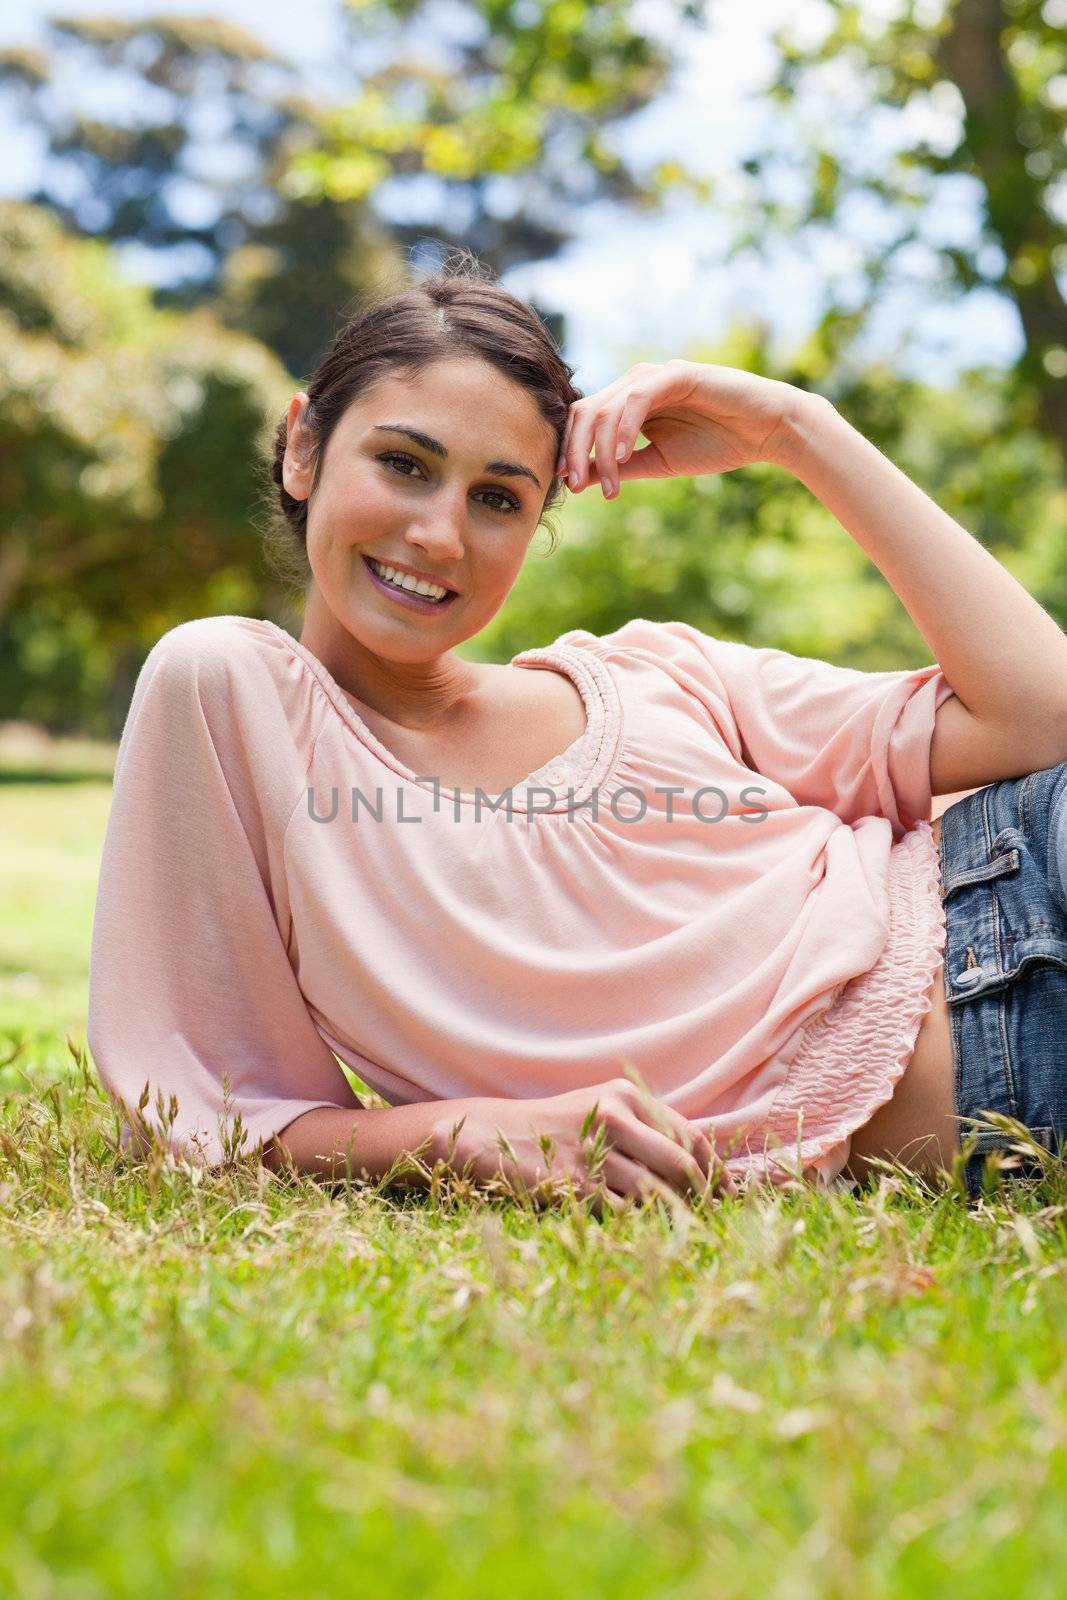 Smiling woman with her head tilted resting her head against her arm while lying down on grass